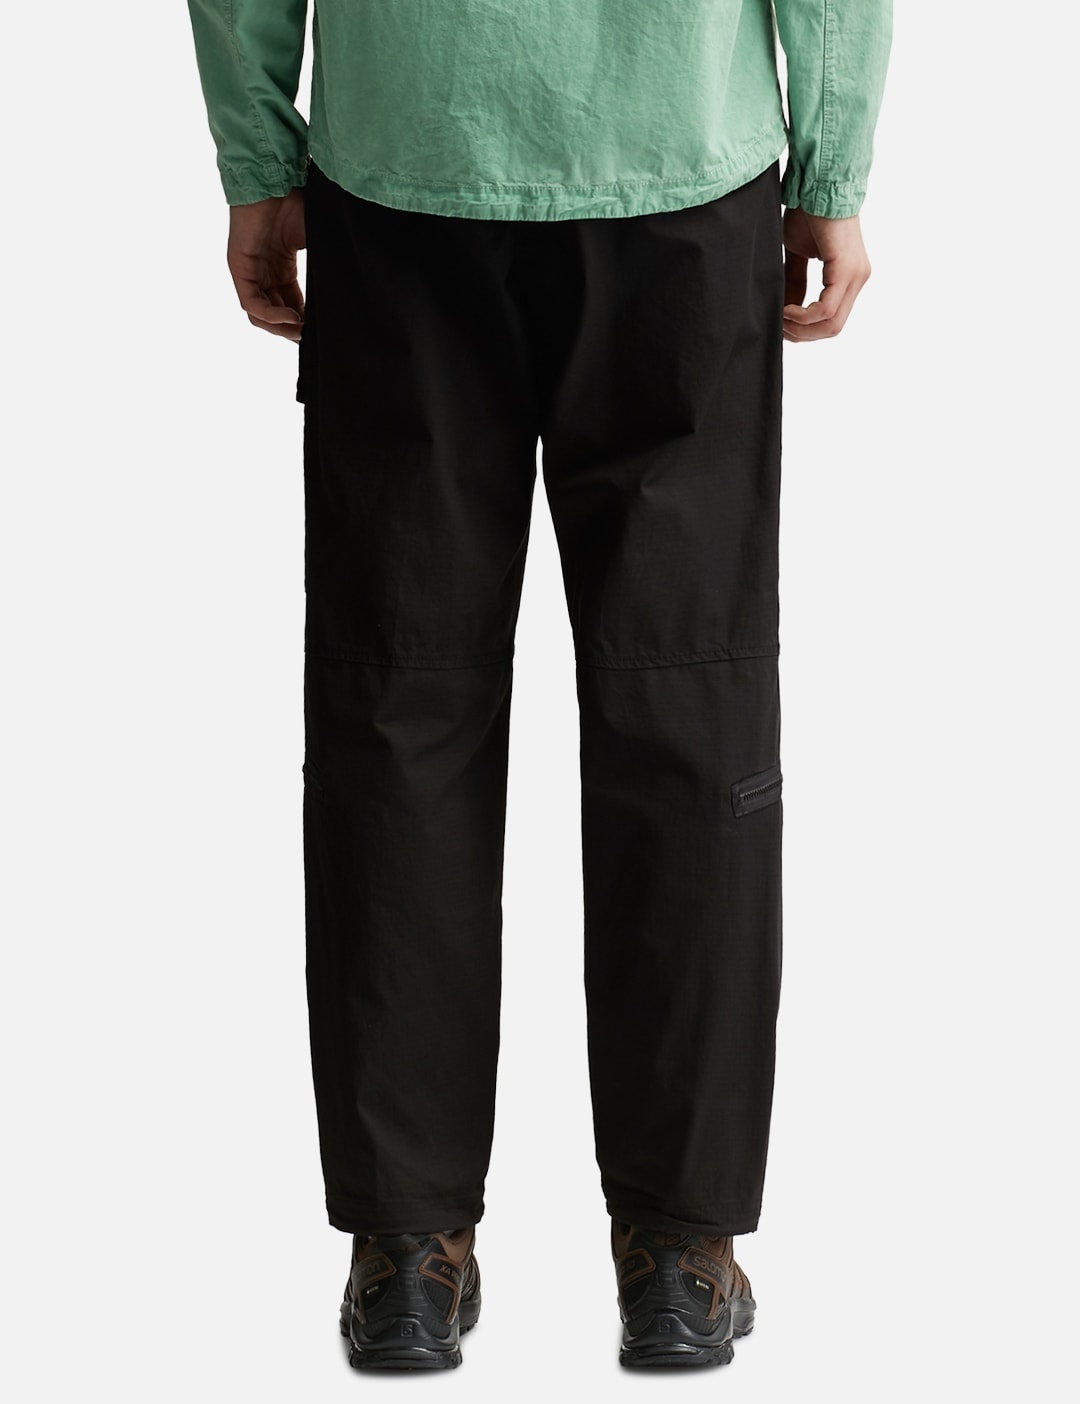 LOOSE FIT CARGO PANTS - 4